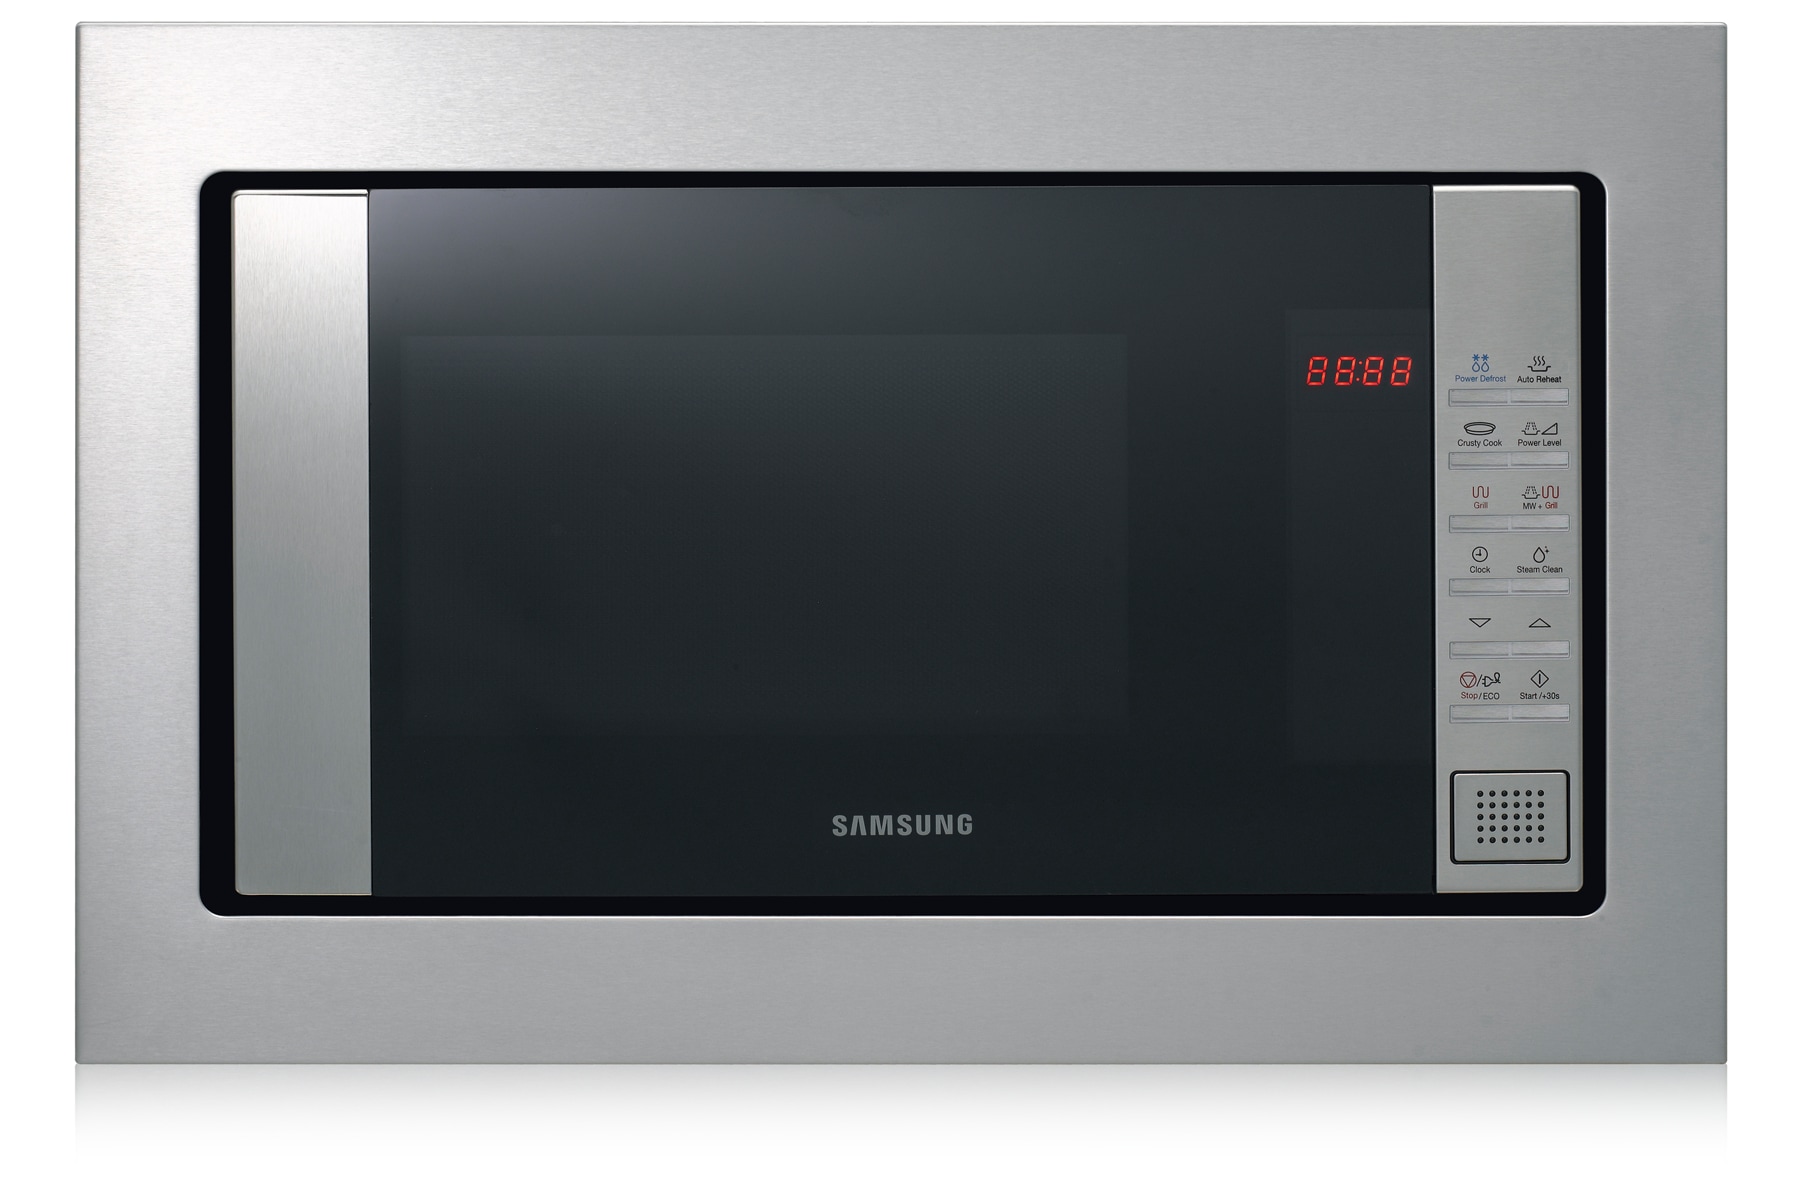 Samsung Micro-ondes encastrable - FG87SST, Cuisson